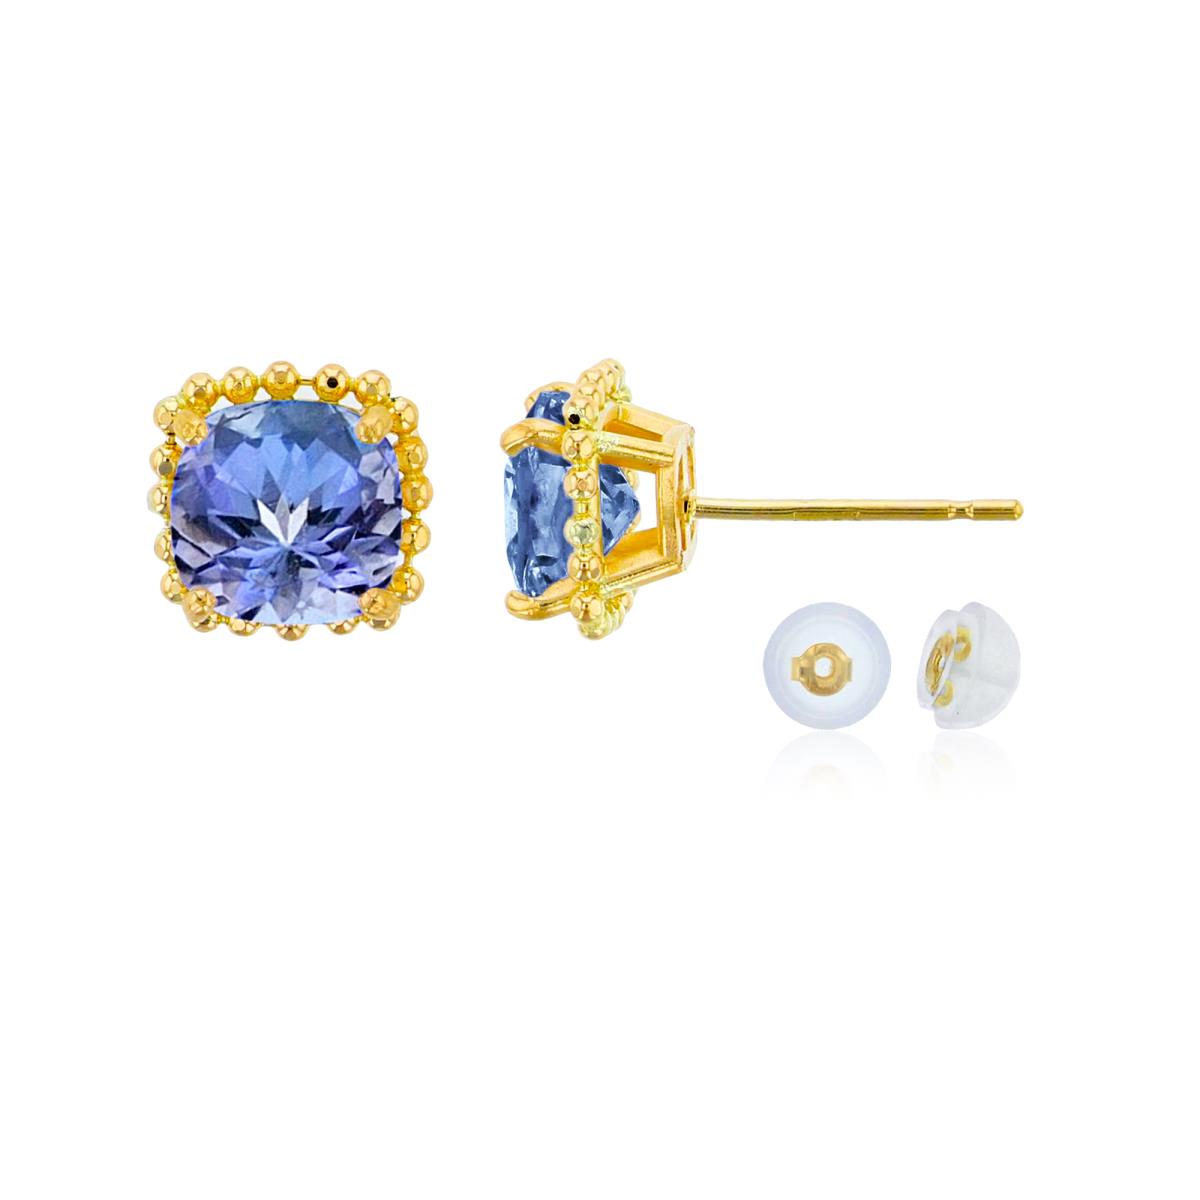 10K Yellow Gold 6x6mm Cushion Cut Tanzanite Bead Frame Stud Earring with Silicone Back